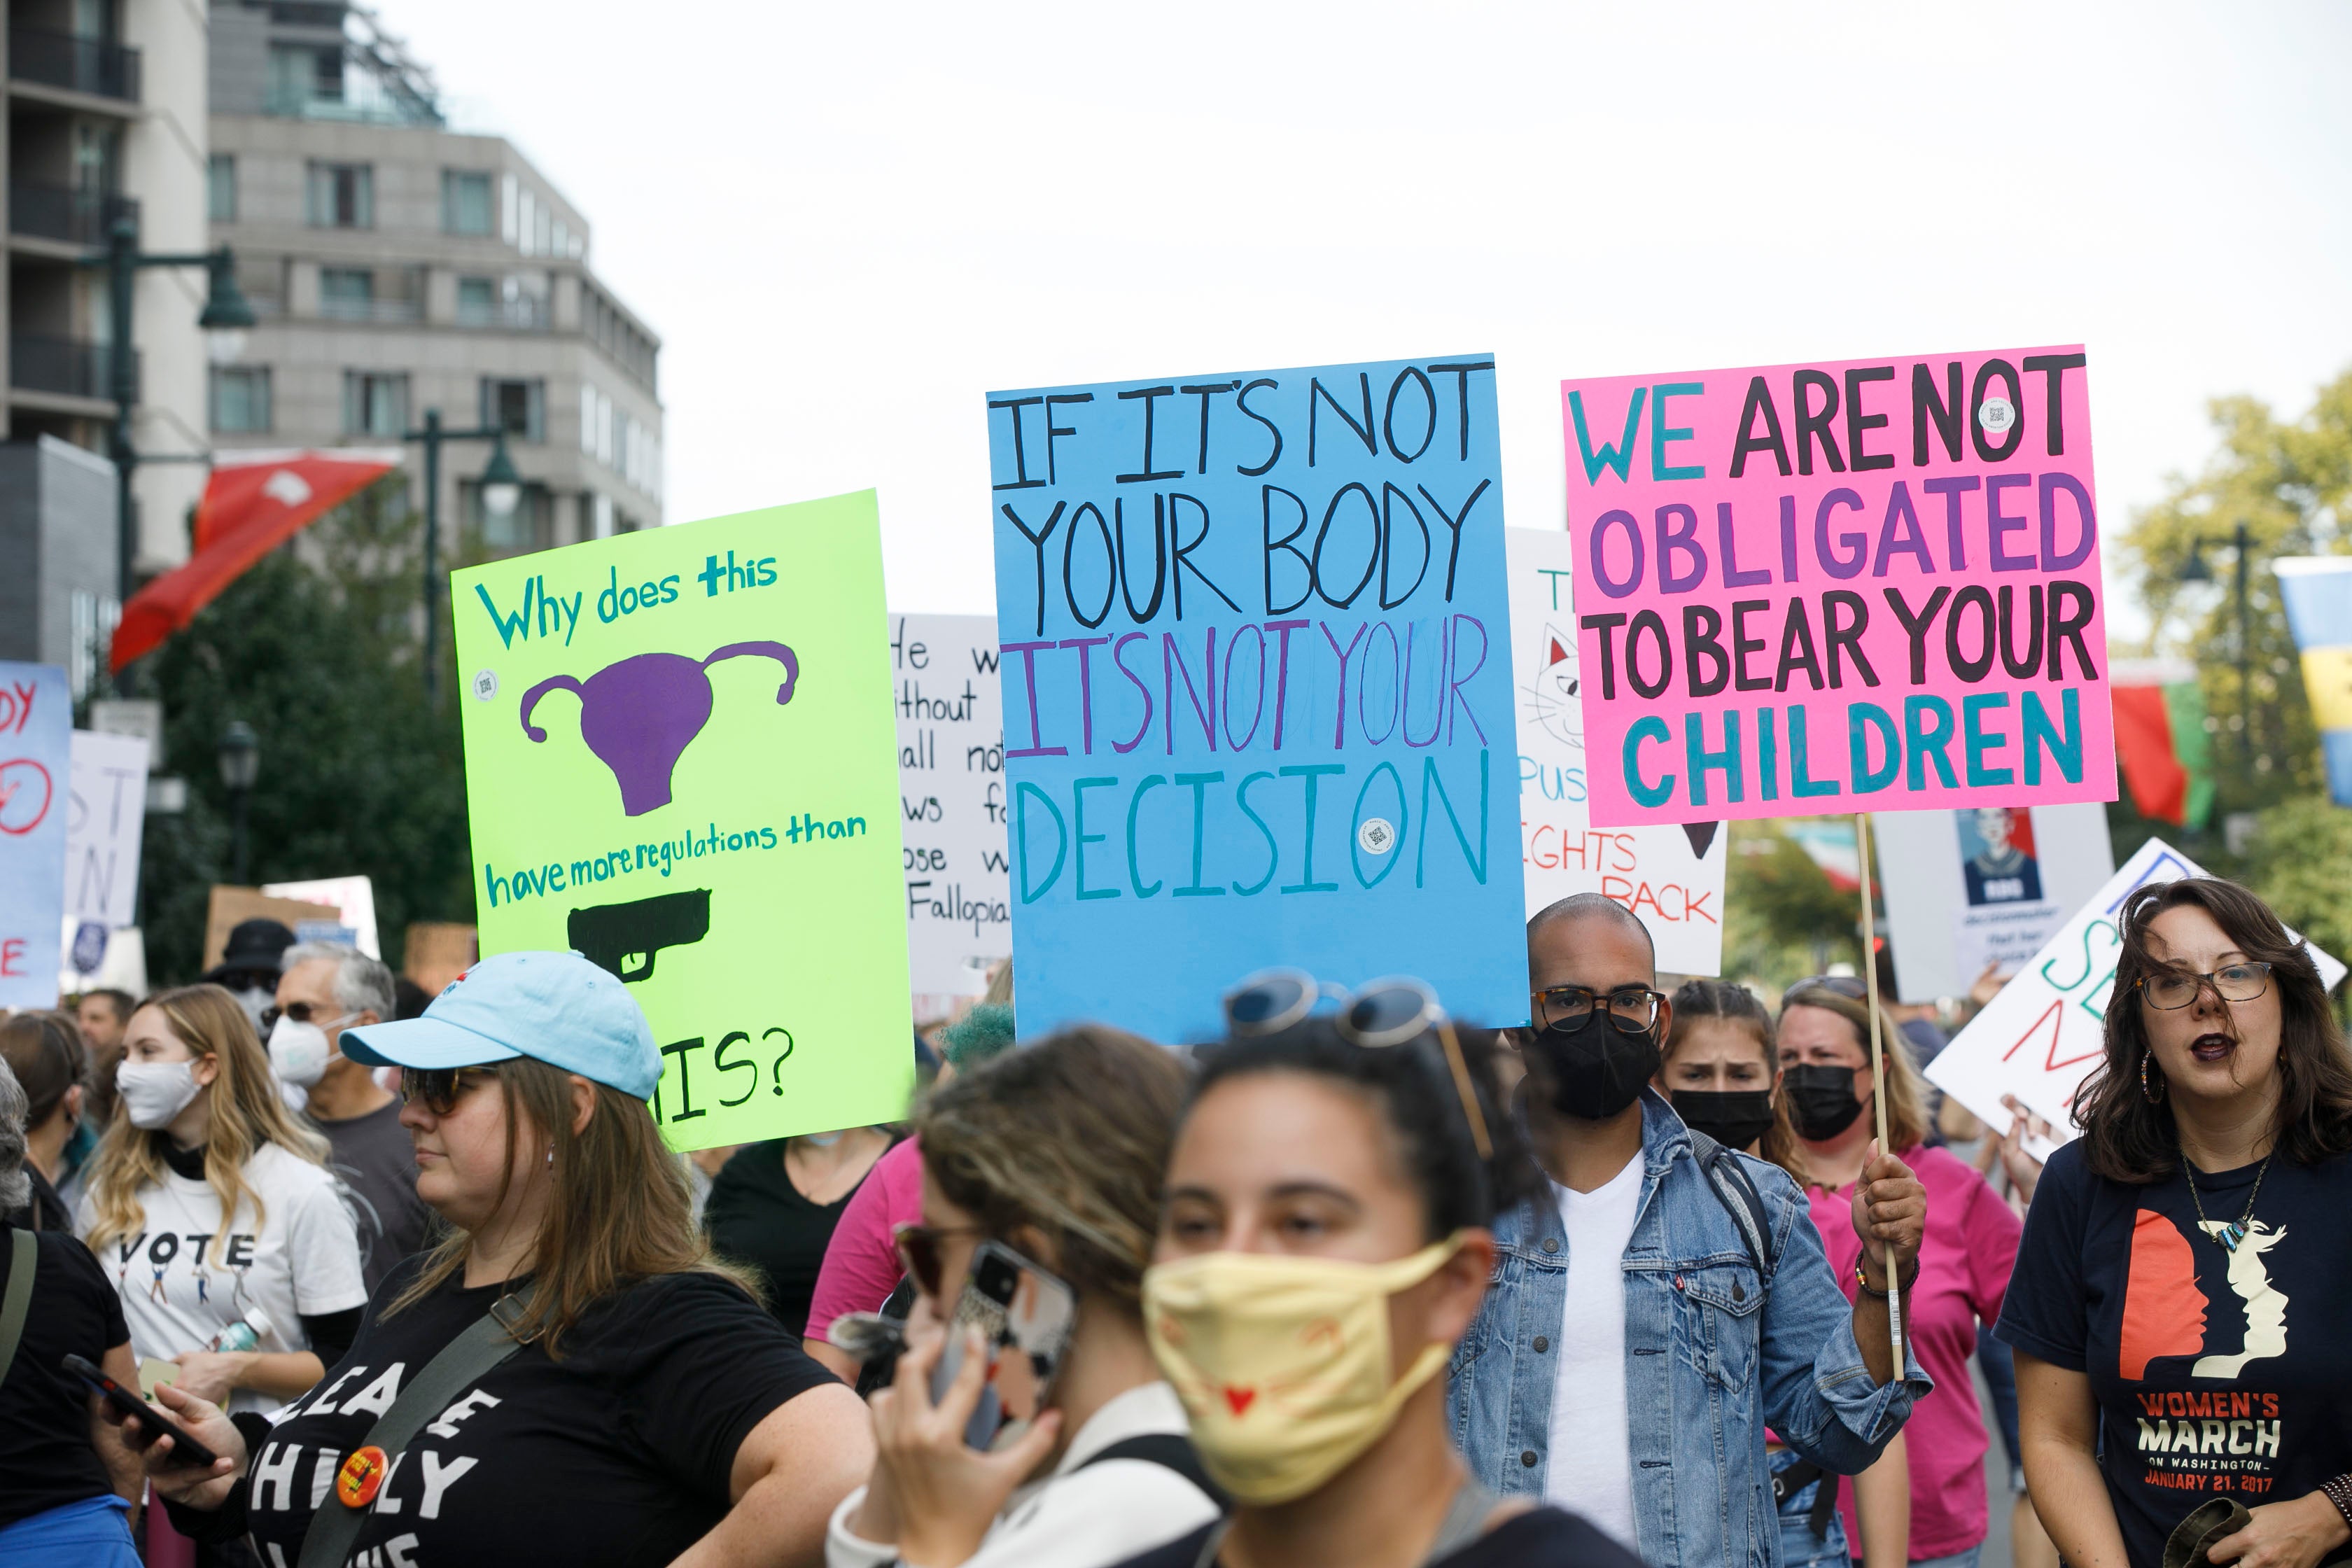 møl bille fordøje March in Philly for reproductive rights draws about 1,000 - WHYY